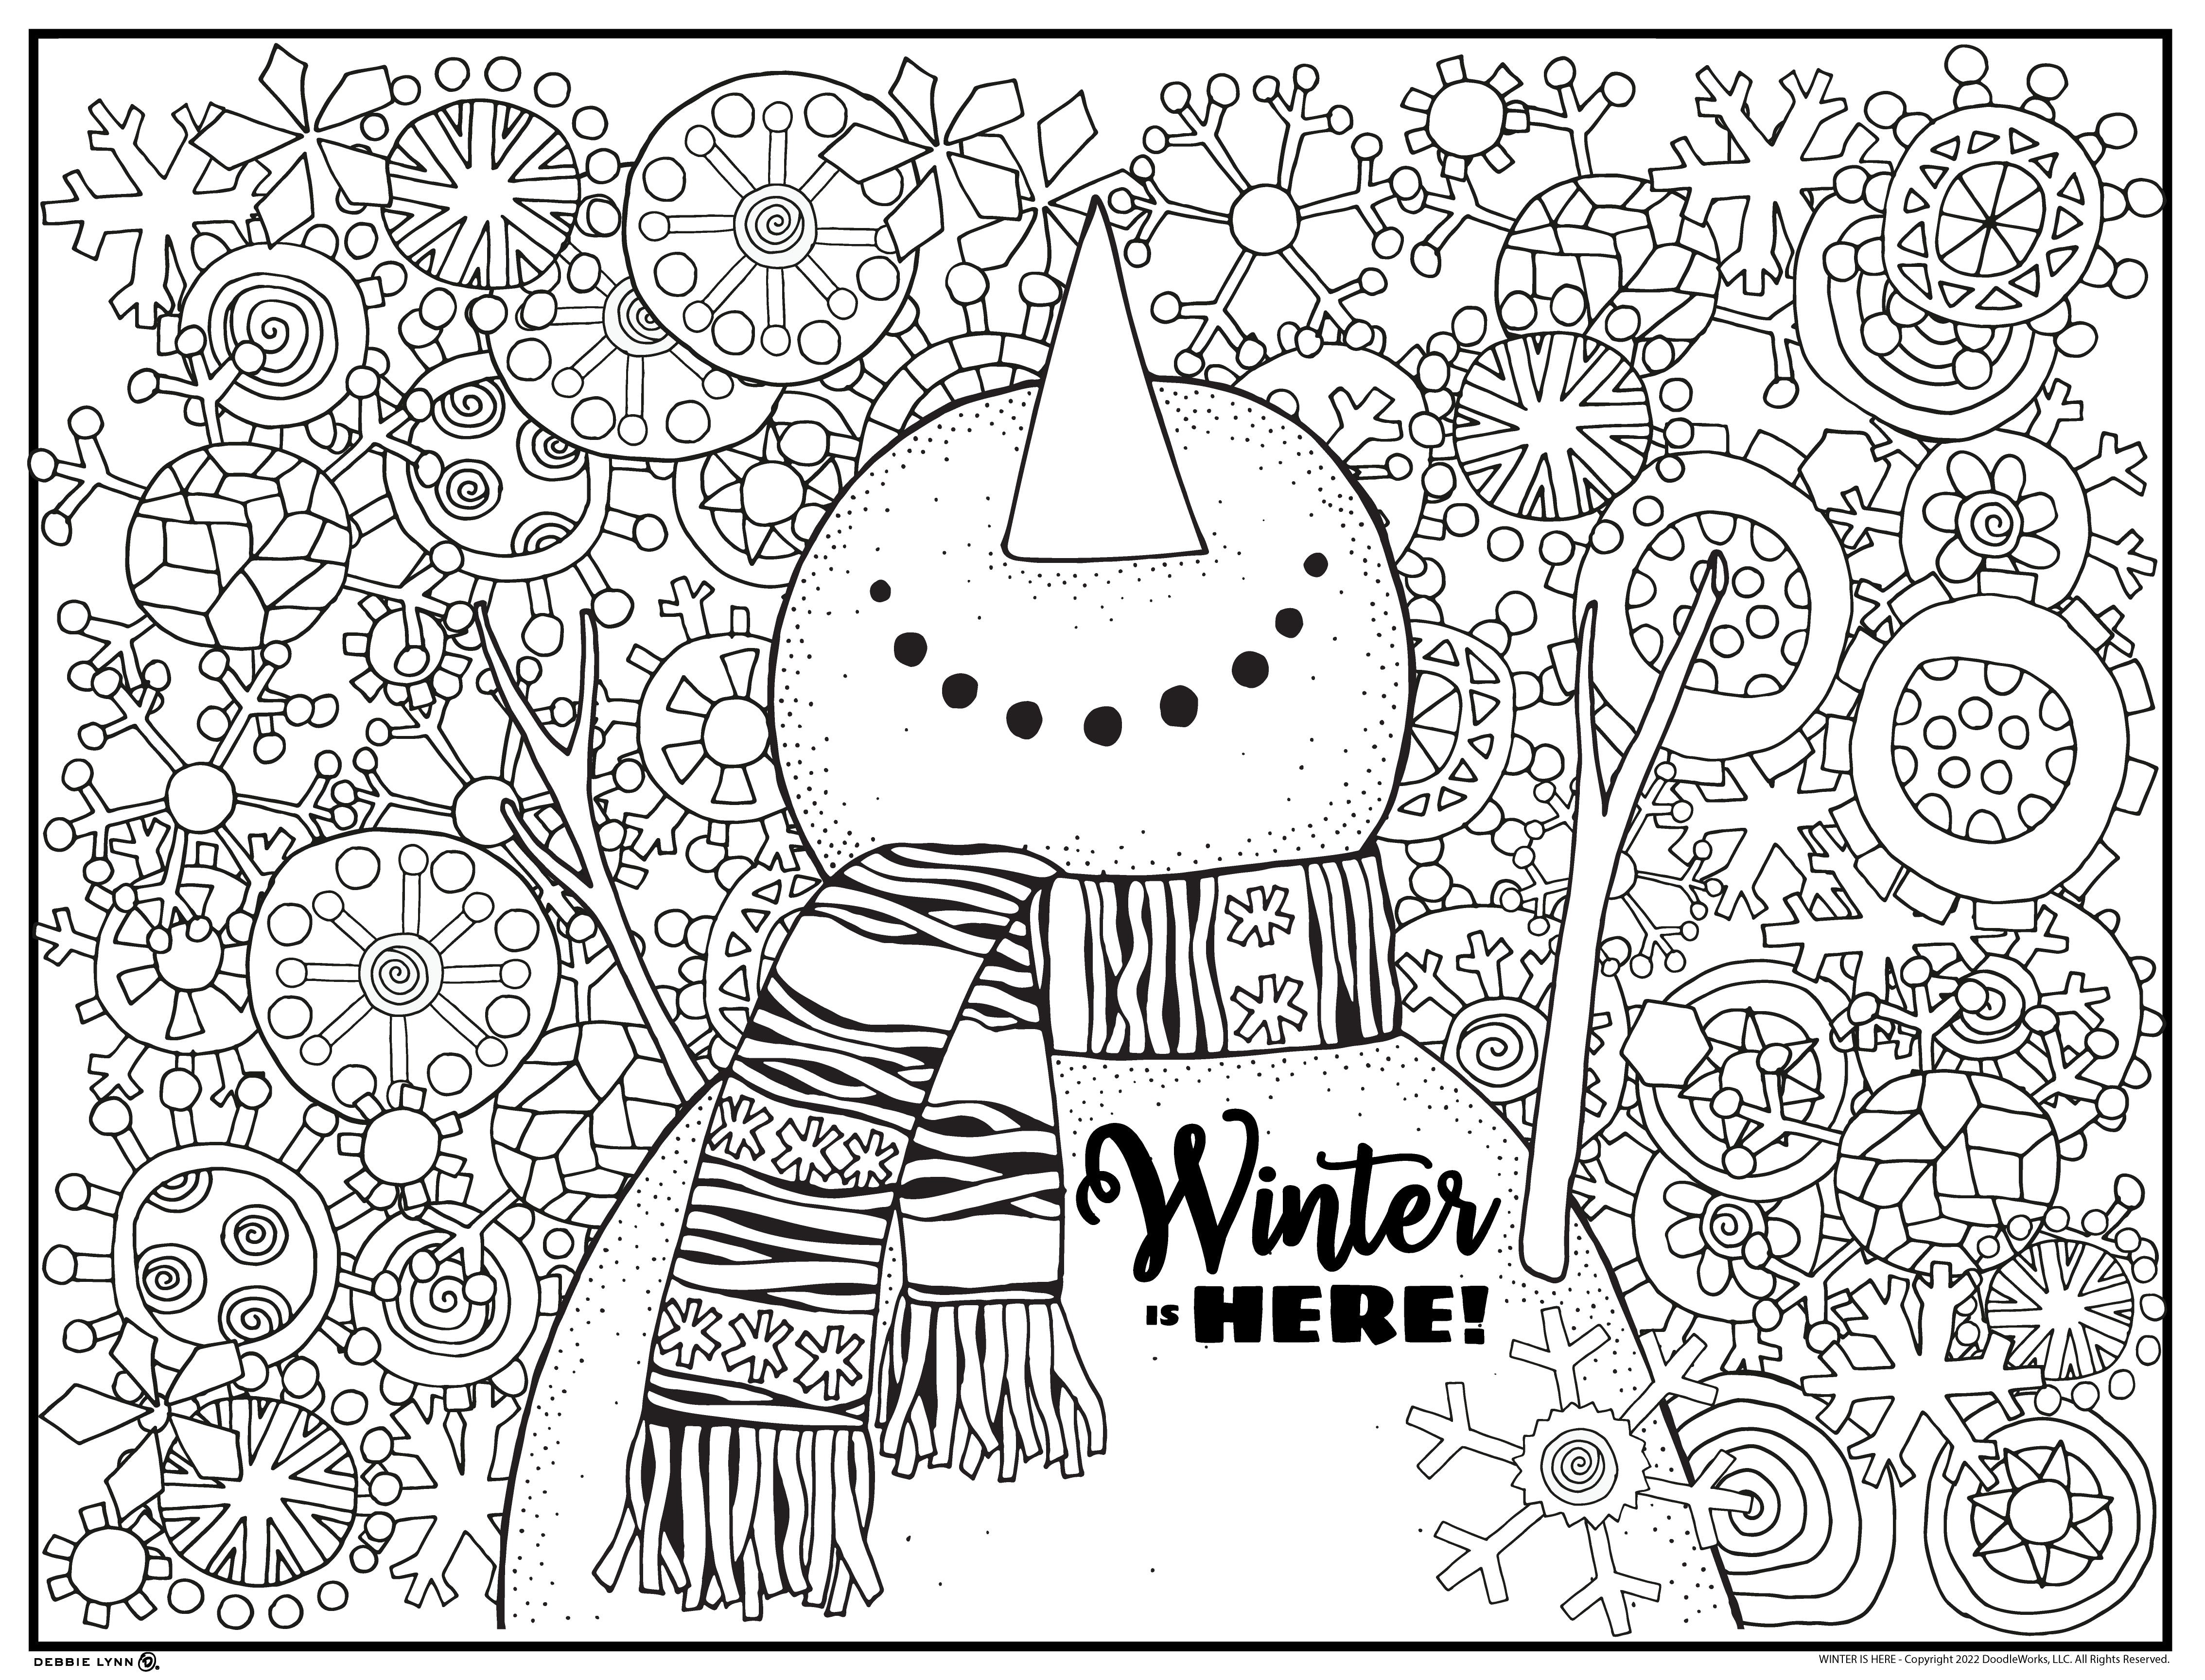 Heart Warming Country Winter Coloring Book for Adults: Giant Super